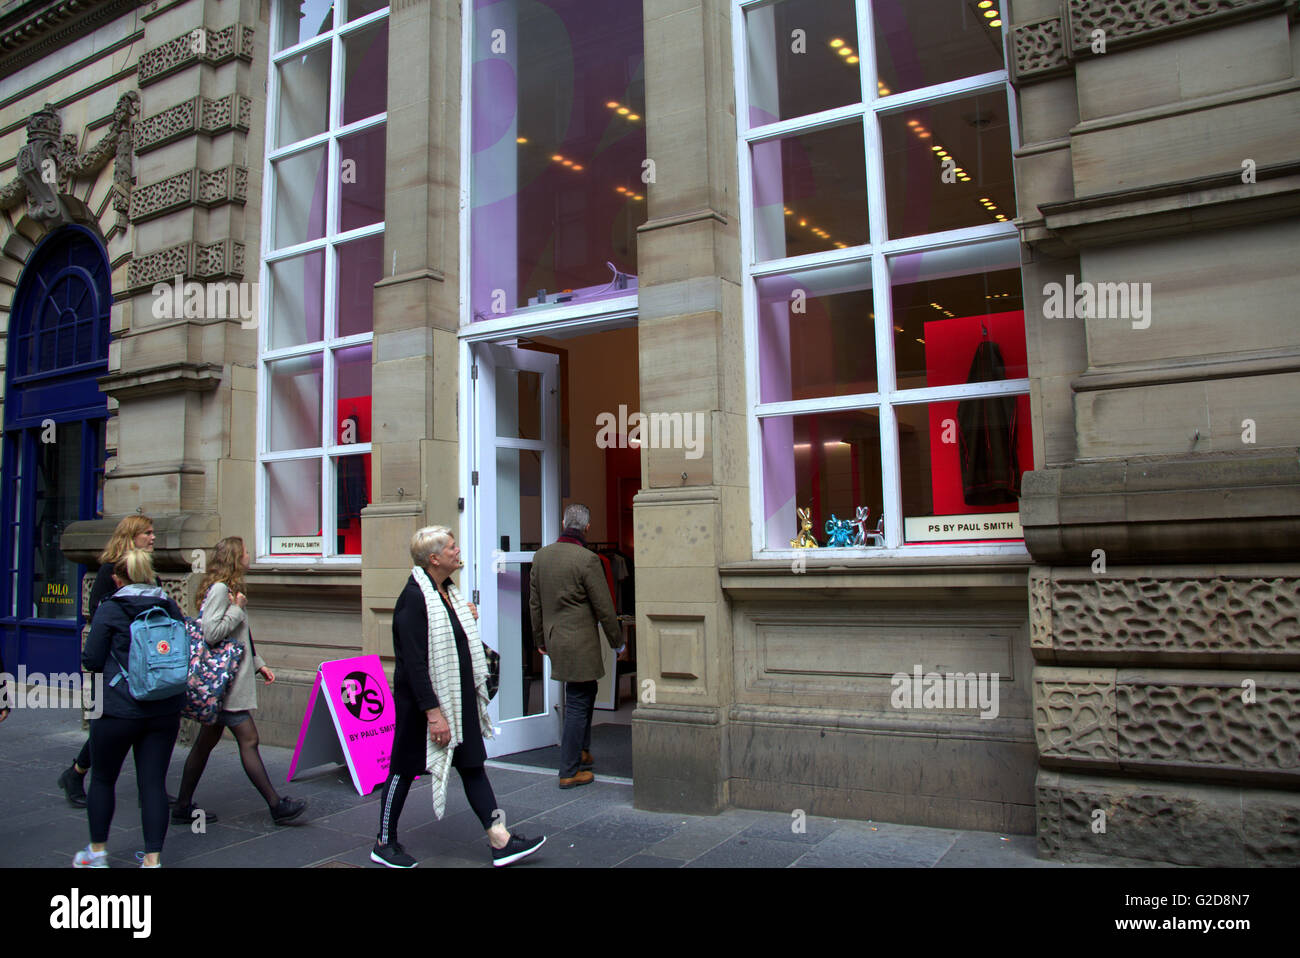 The  iconic British designer Paul Smith has opened his first ever  Scottish store, a pop-up concept shop,which will open for a six month run. His special feeling for the city was recently highlighted in  his ‘Hello, my name is Paul Smith’ exhibition that ran in 'The Lighthouse' design centre earlier this year.  © Credit:  gerard ferry/Alamy Live News Stock Photo